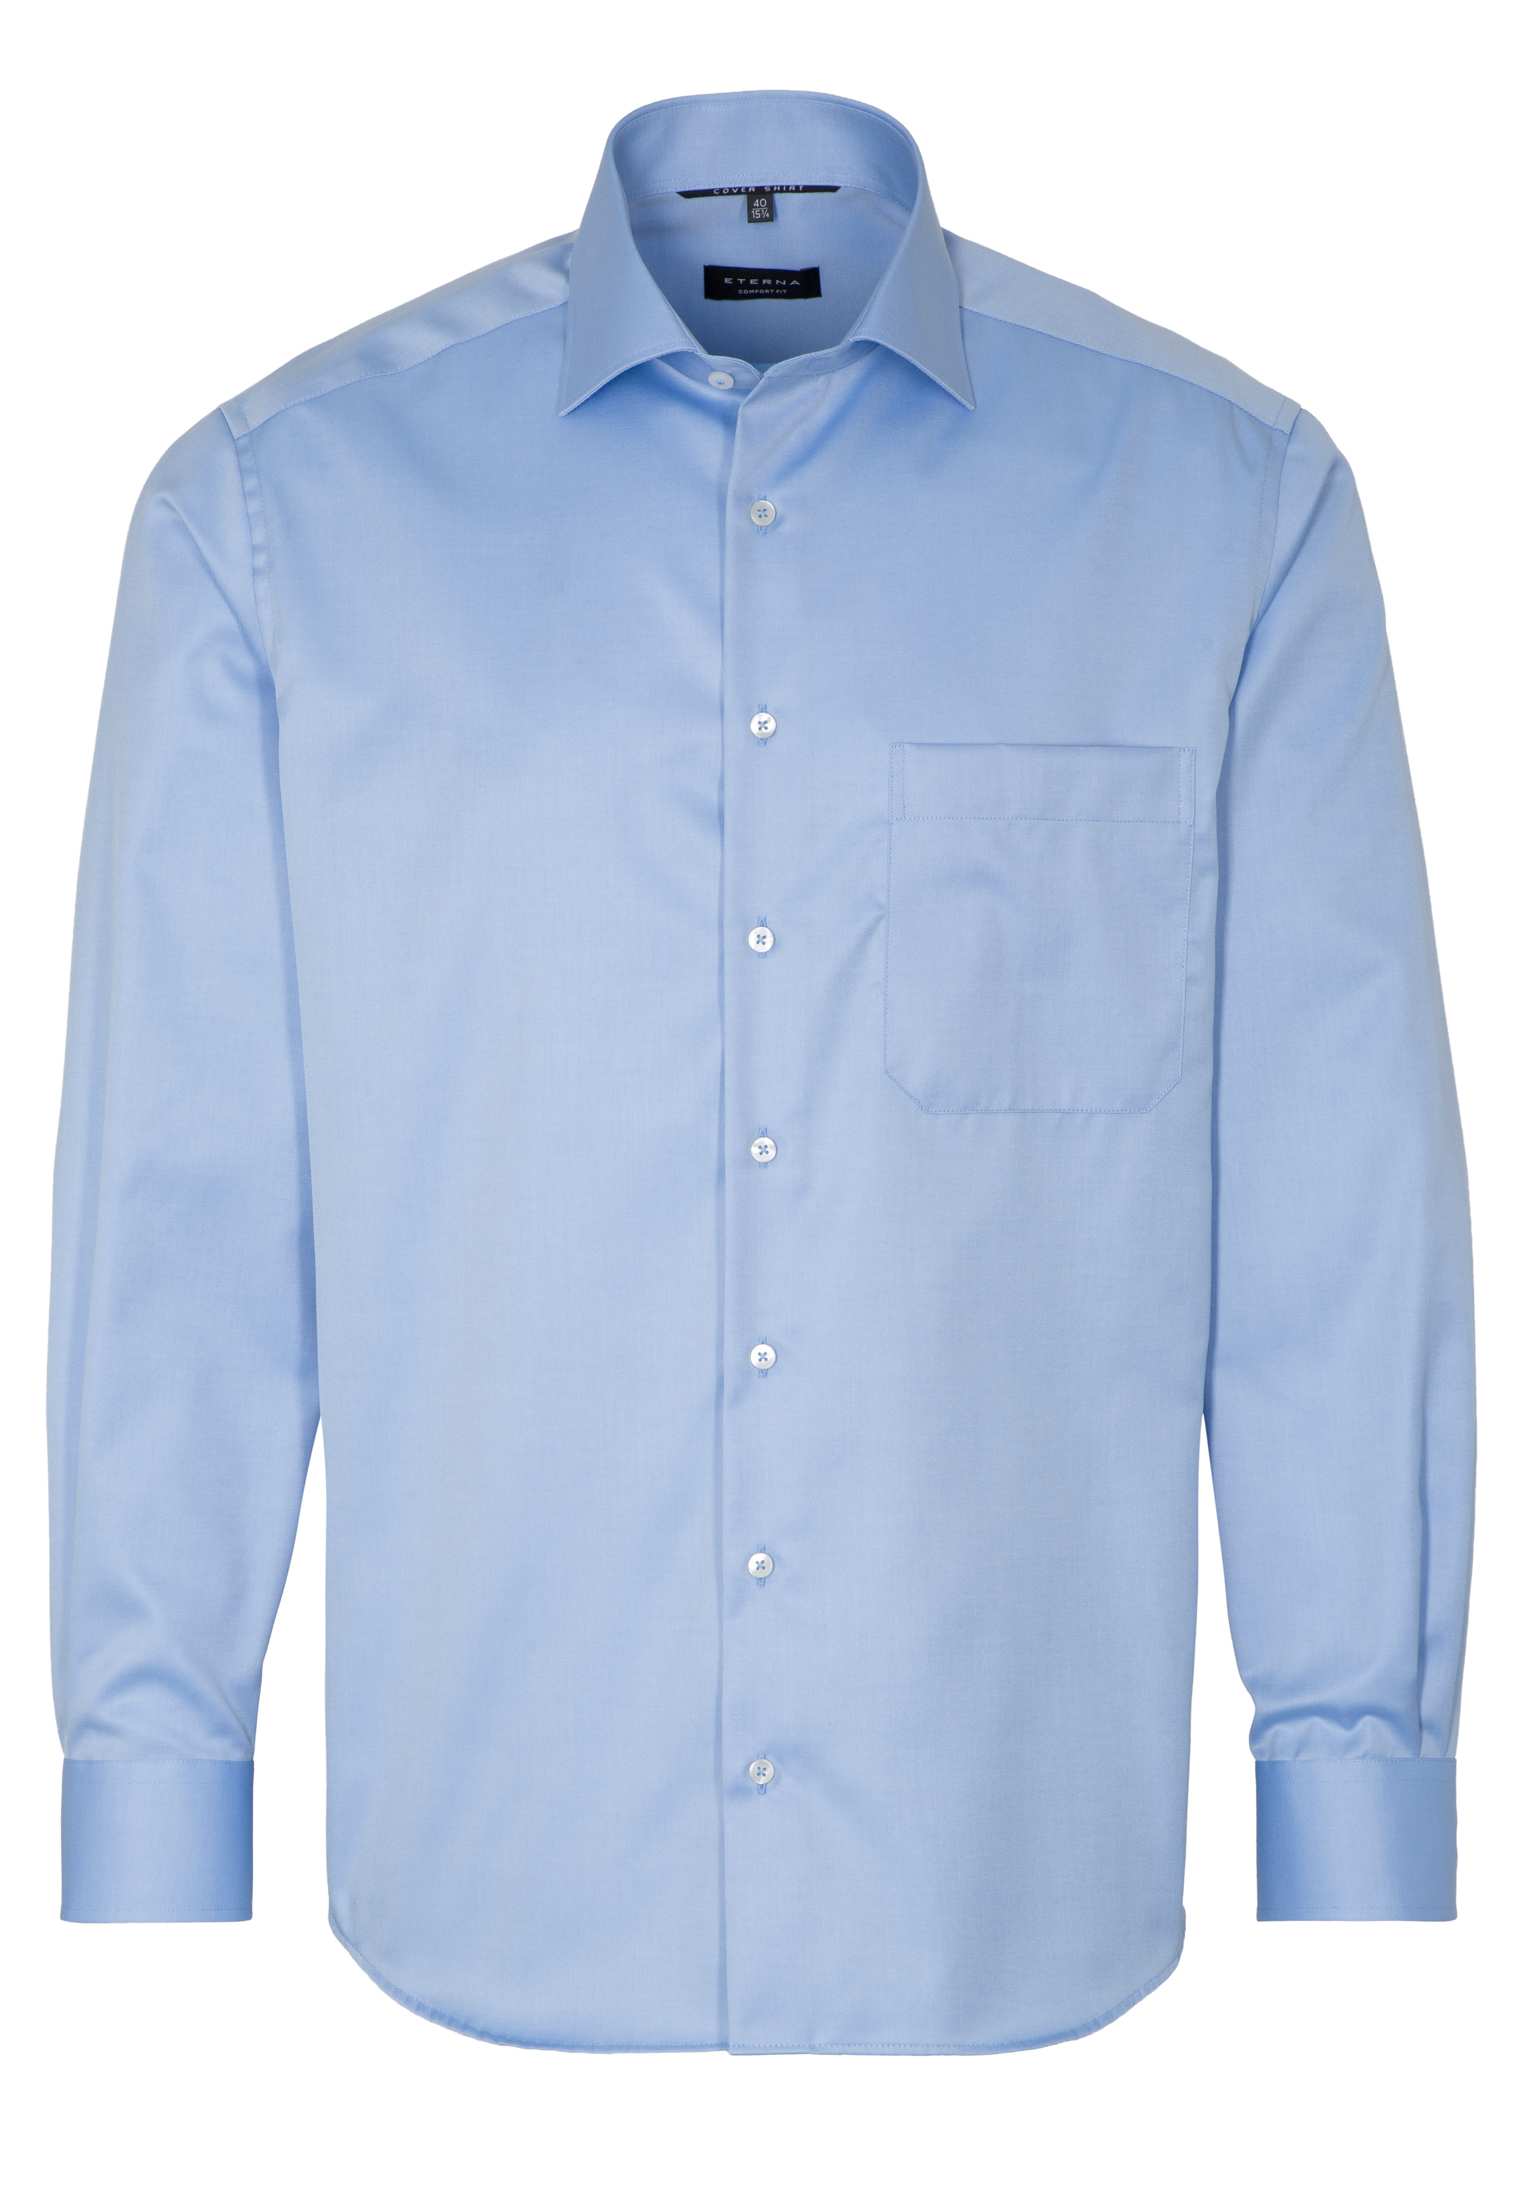 COMFORT FIT Cover Shirt in middenblauw vlakte